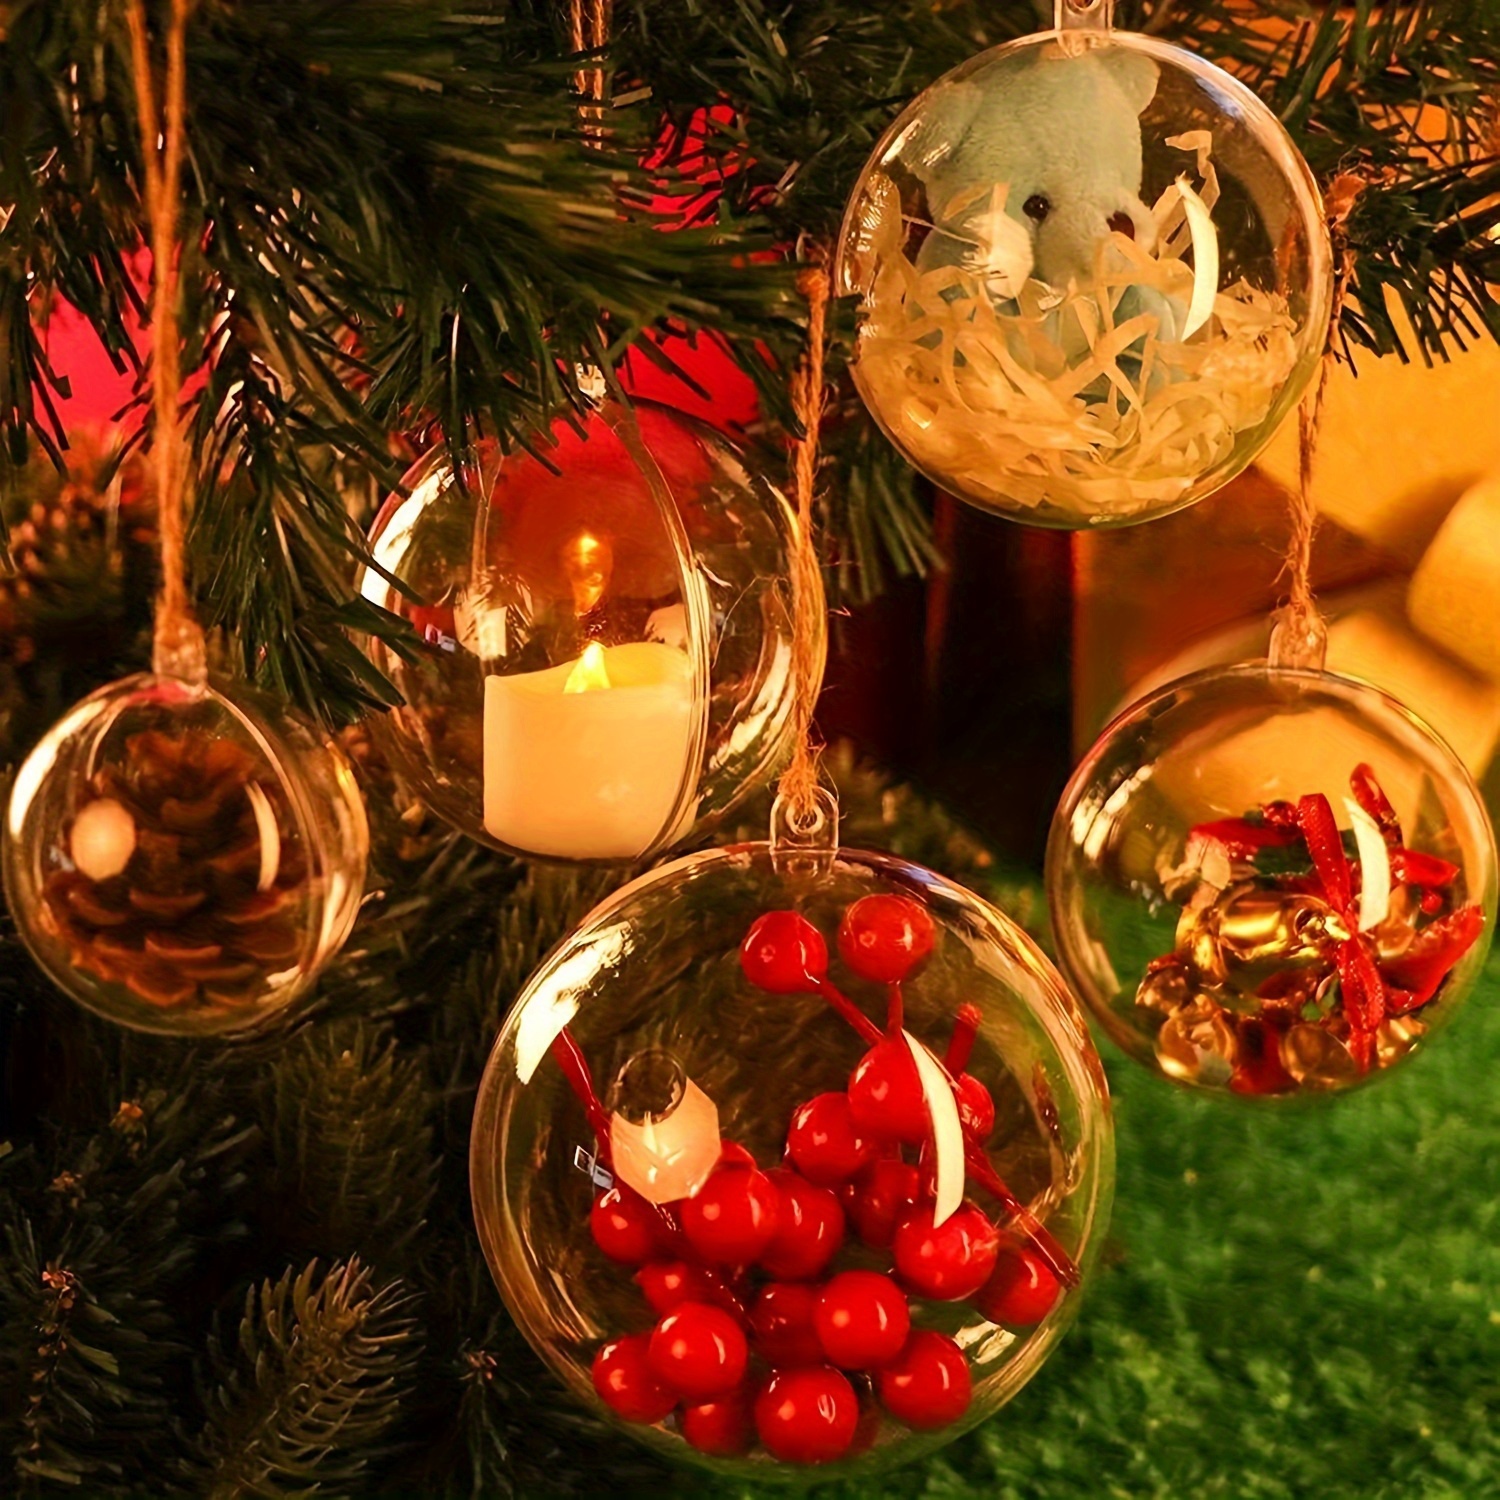 10Pcs Christmas Tree Hanging Decorations Ball Clear Plastic Round Ball Fillable  Ornaments Party Wedding Xmas Decor